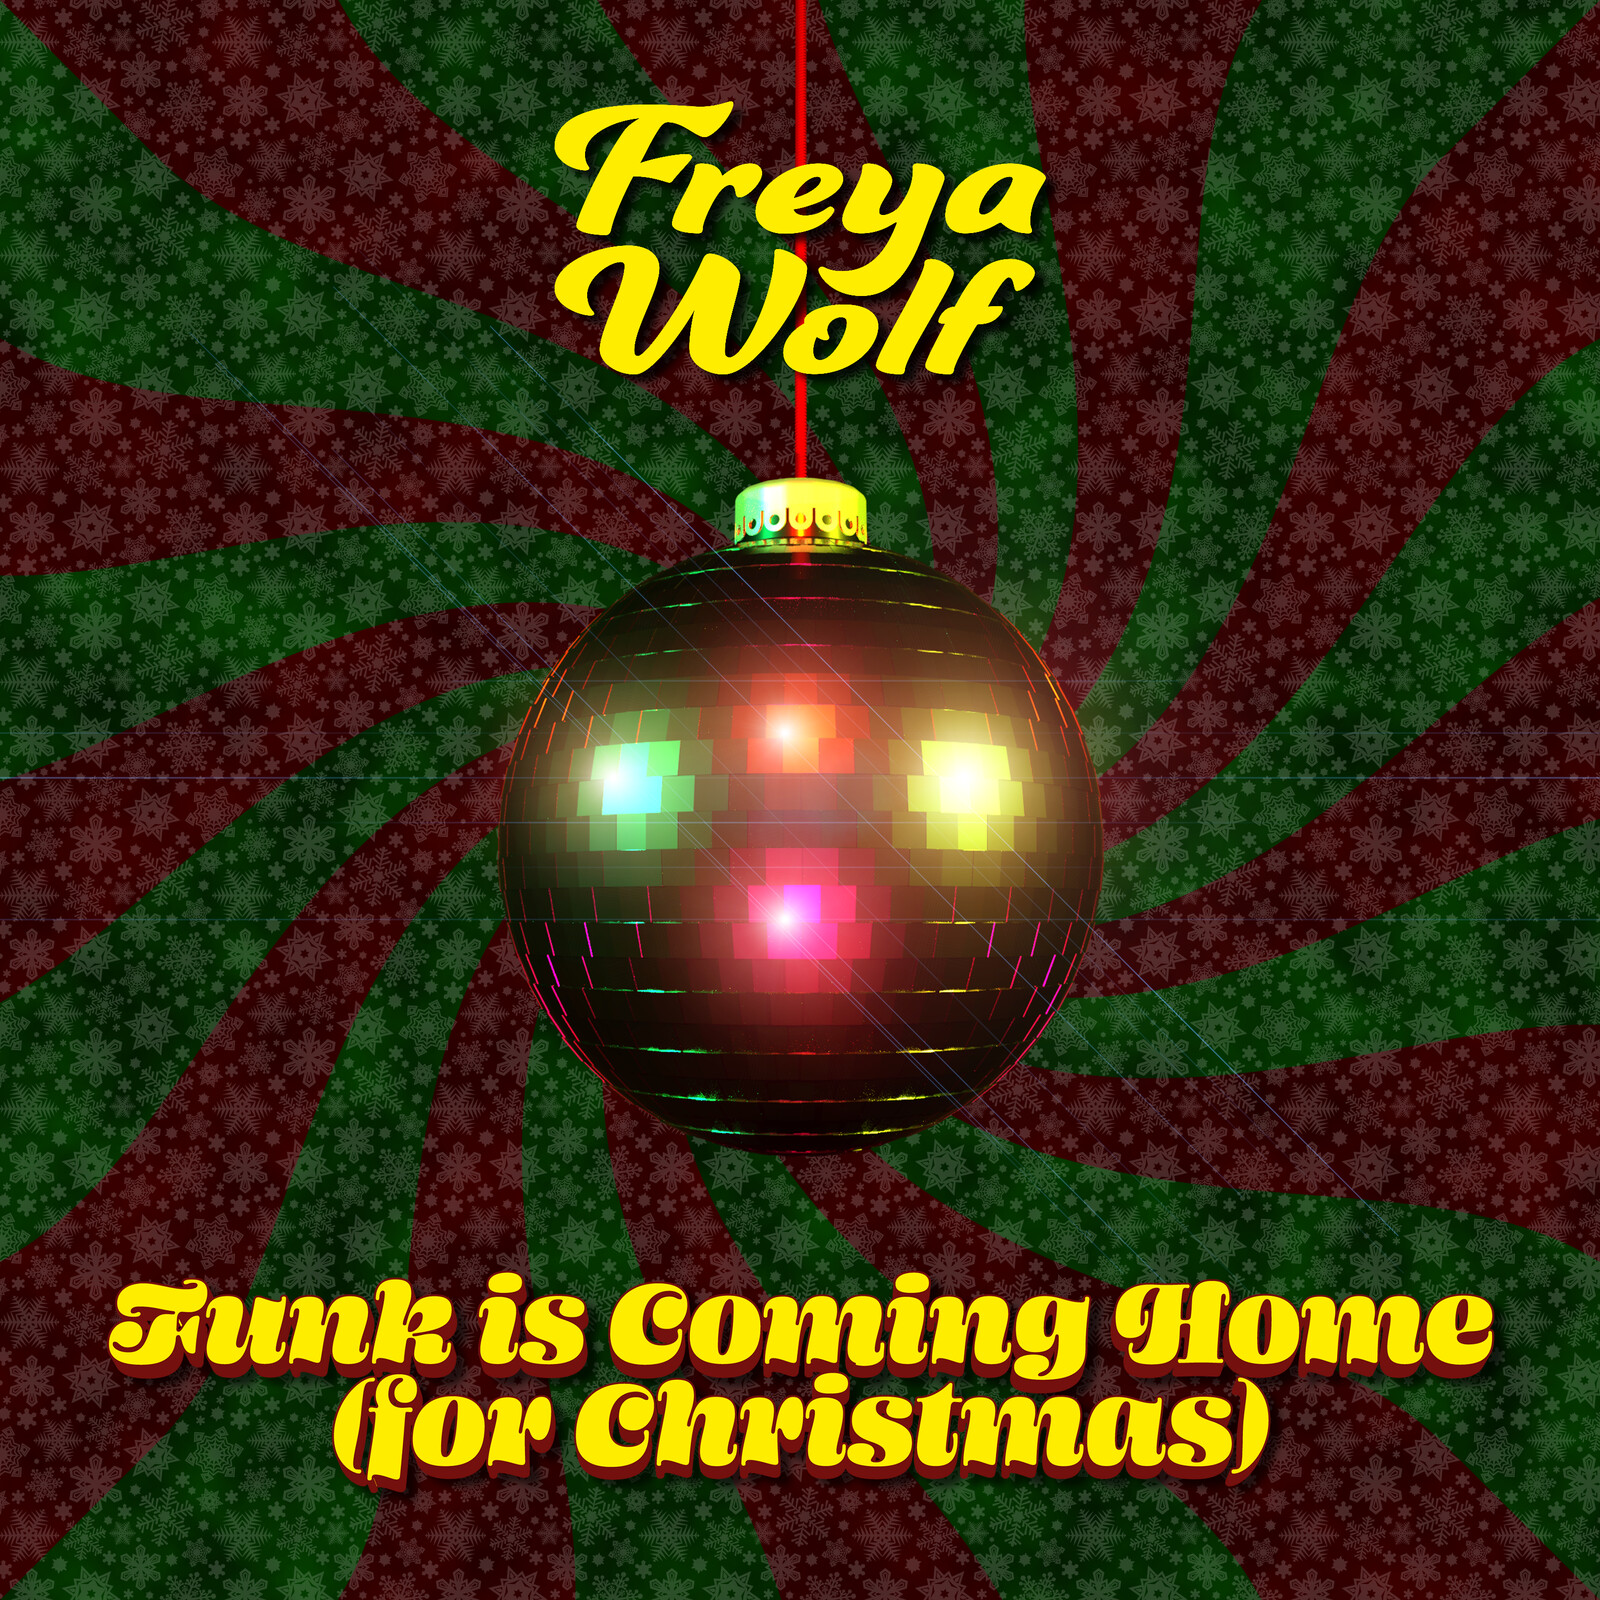 Freya Wolf - "Funk is Coming Home (for Chritmas)" single cover.